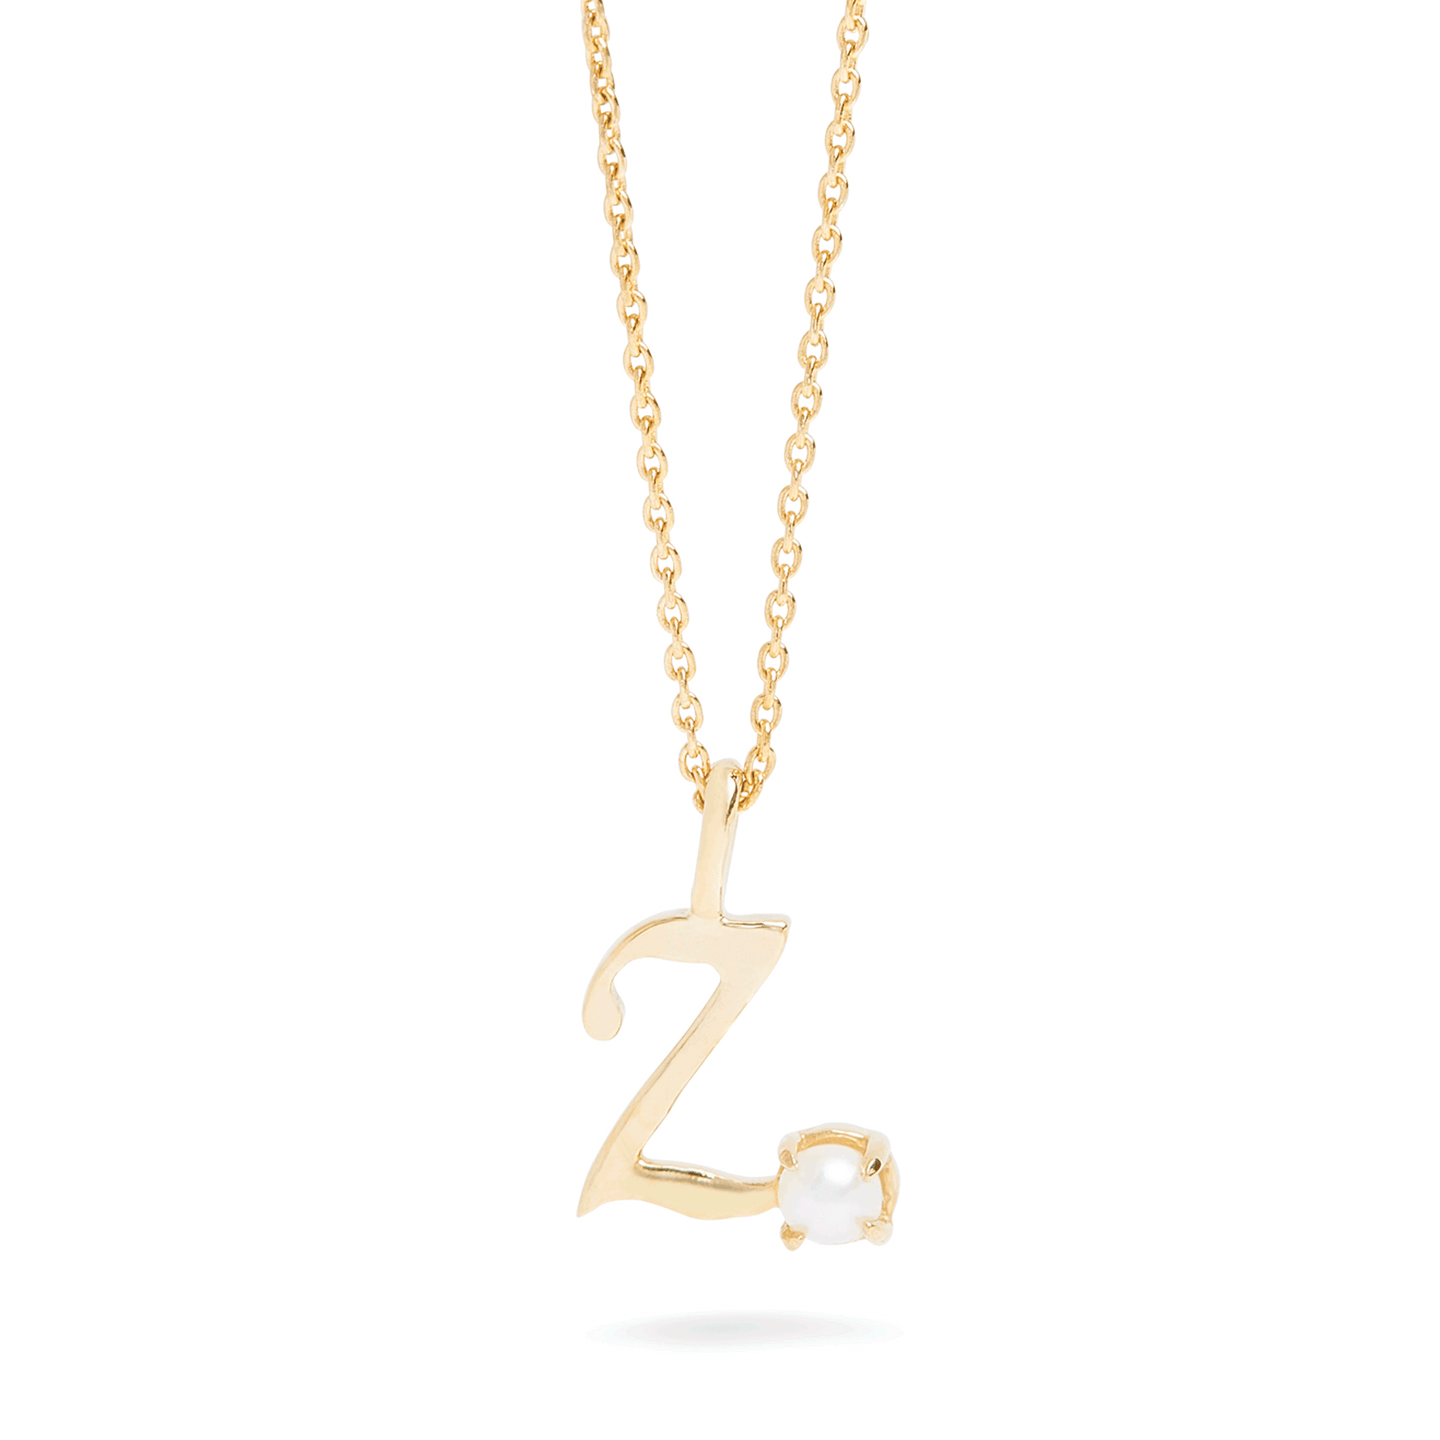 Initial Necklace 10K Solid Gold Heart Pendant Charm Letter 